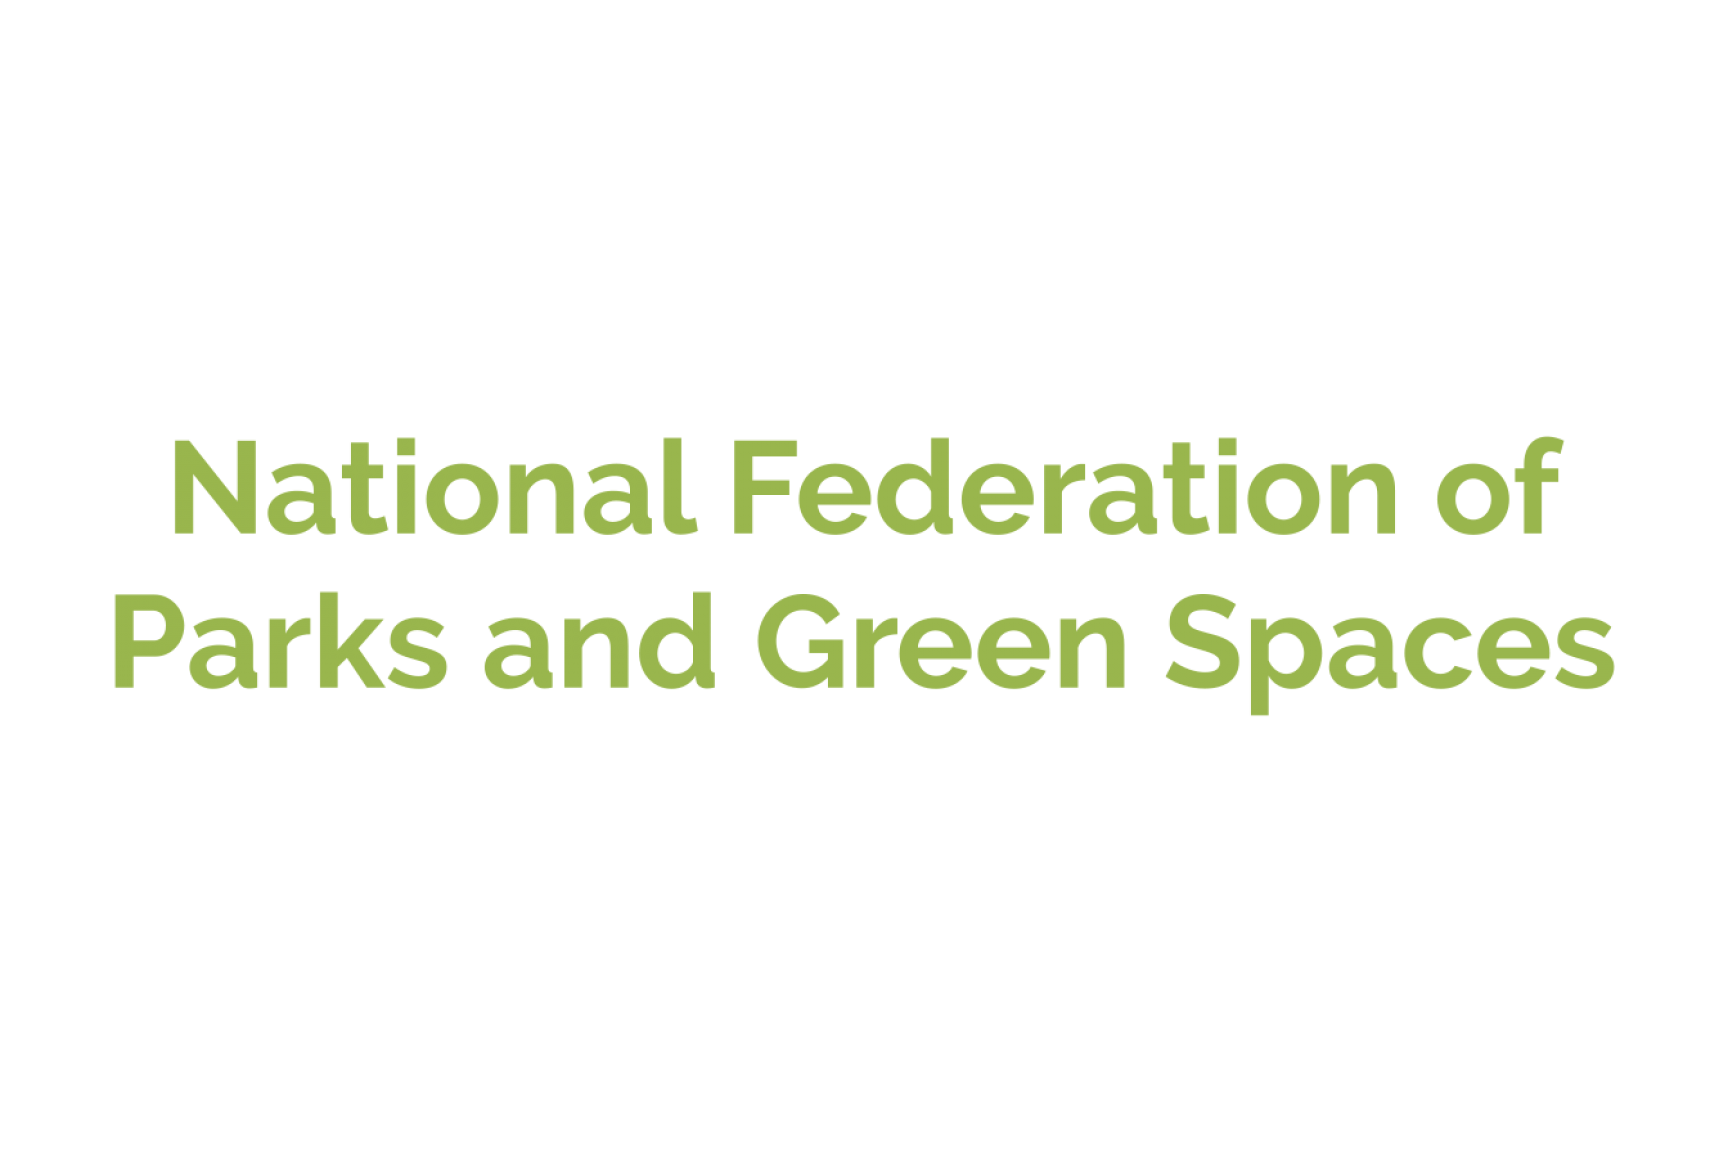 National Federation of Parks and Green Spaces